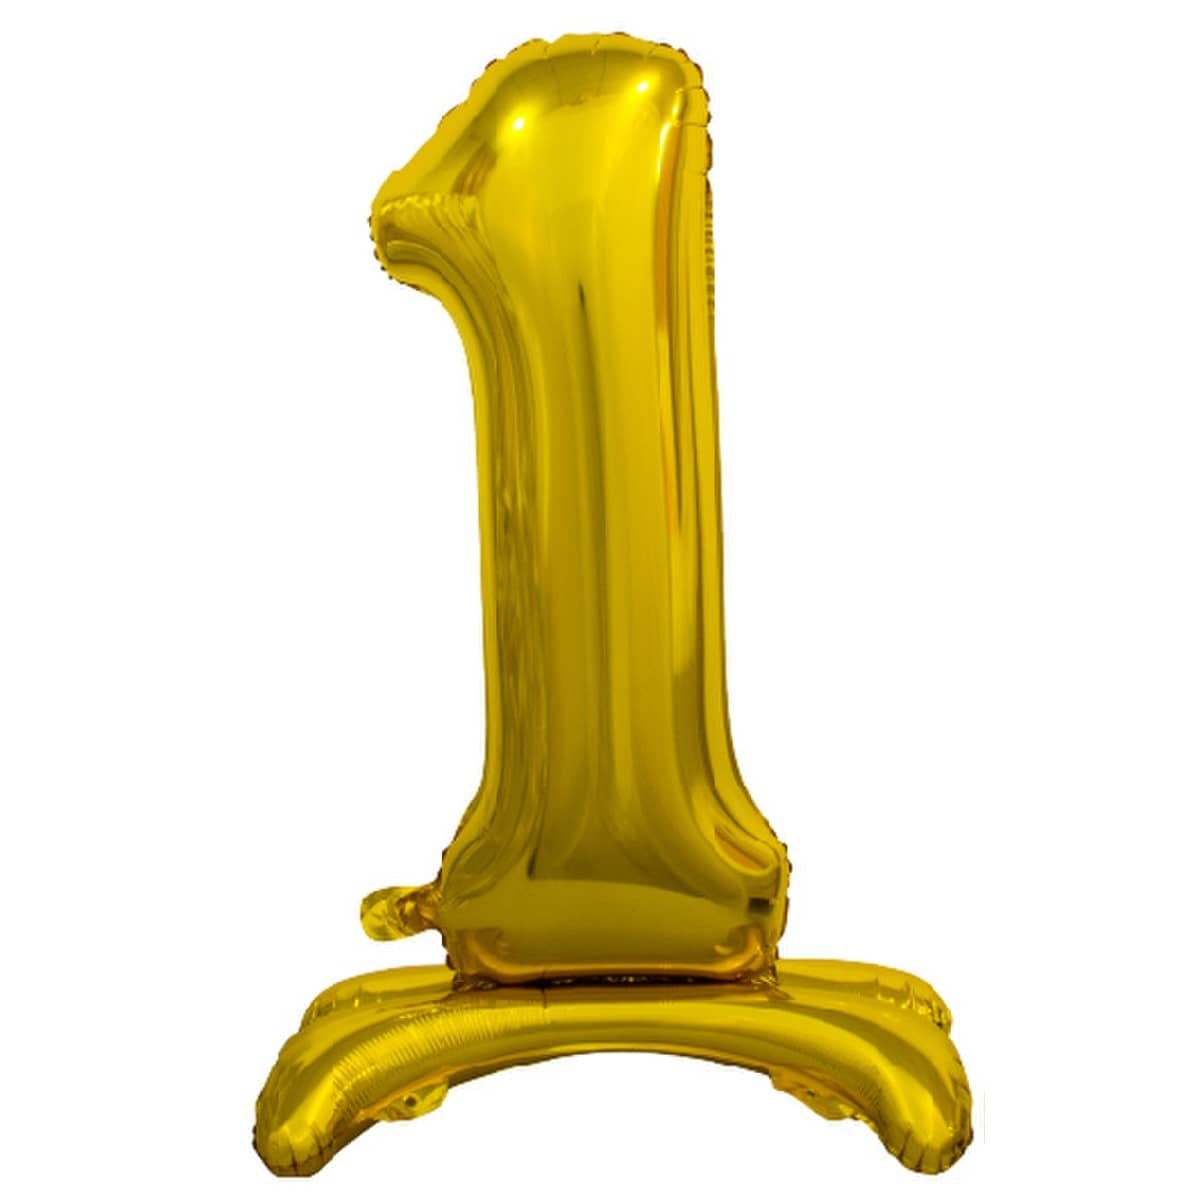 Gold "1" Giant Standing Air Filled Numeral Foil Balloon 76CM (30") 13231 - Party Owls